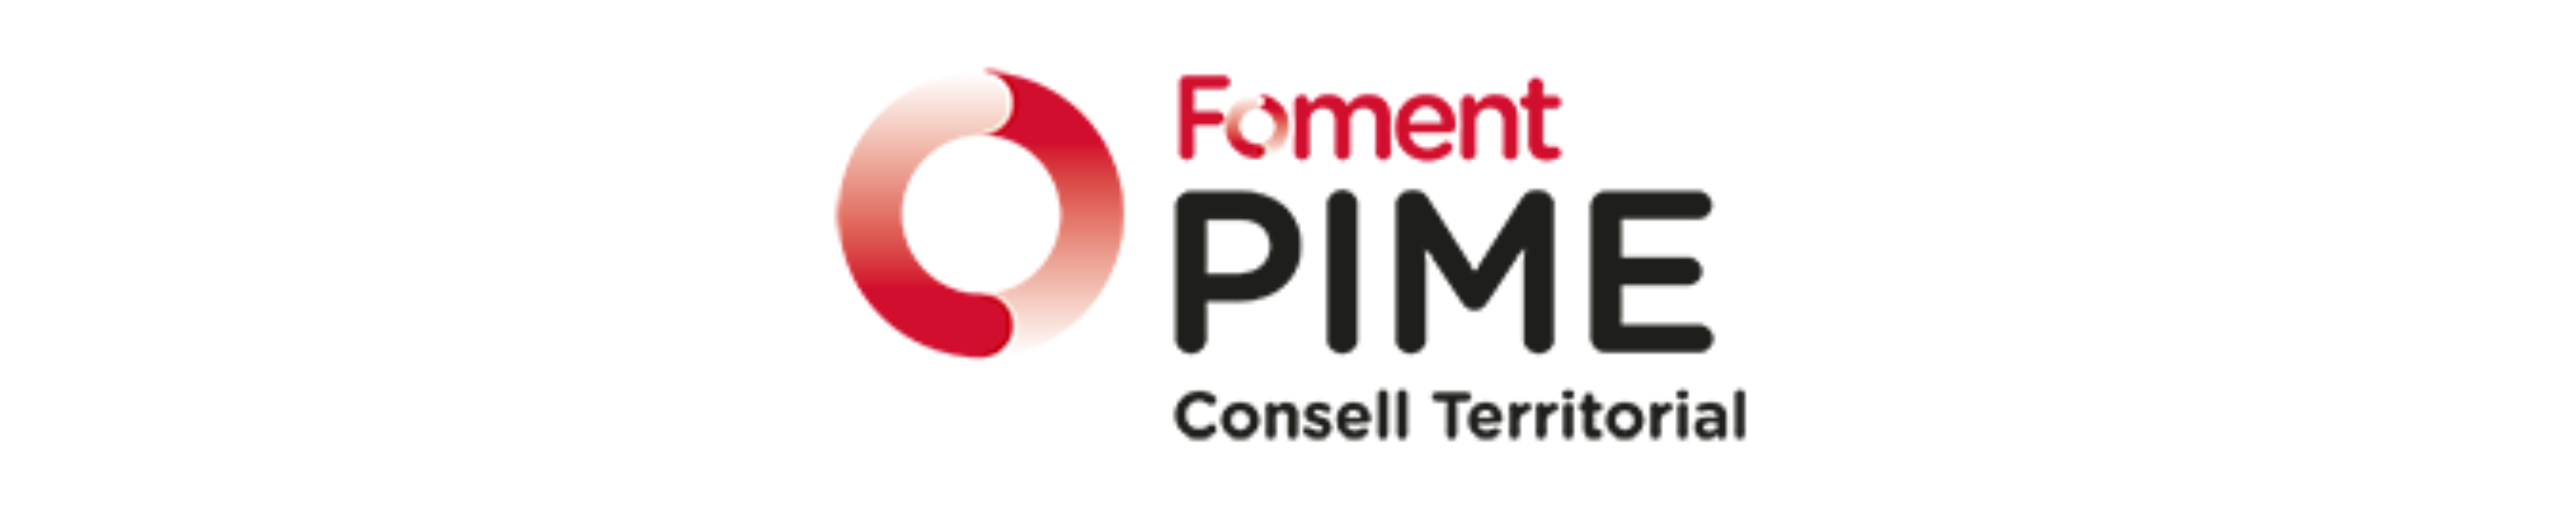 Foment Pime Consell Territorial logo